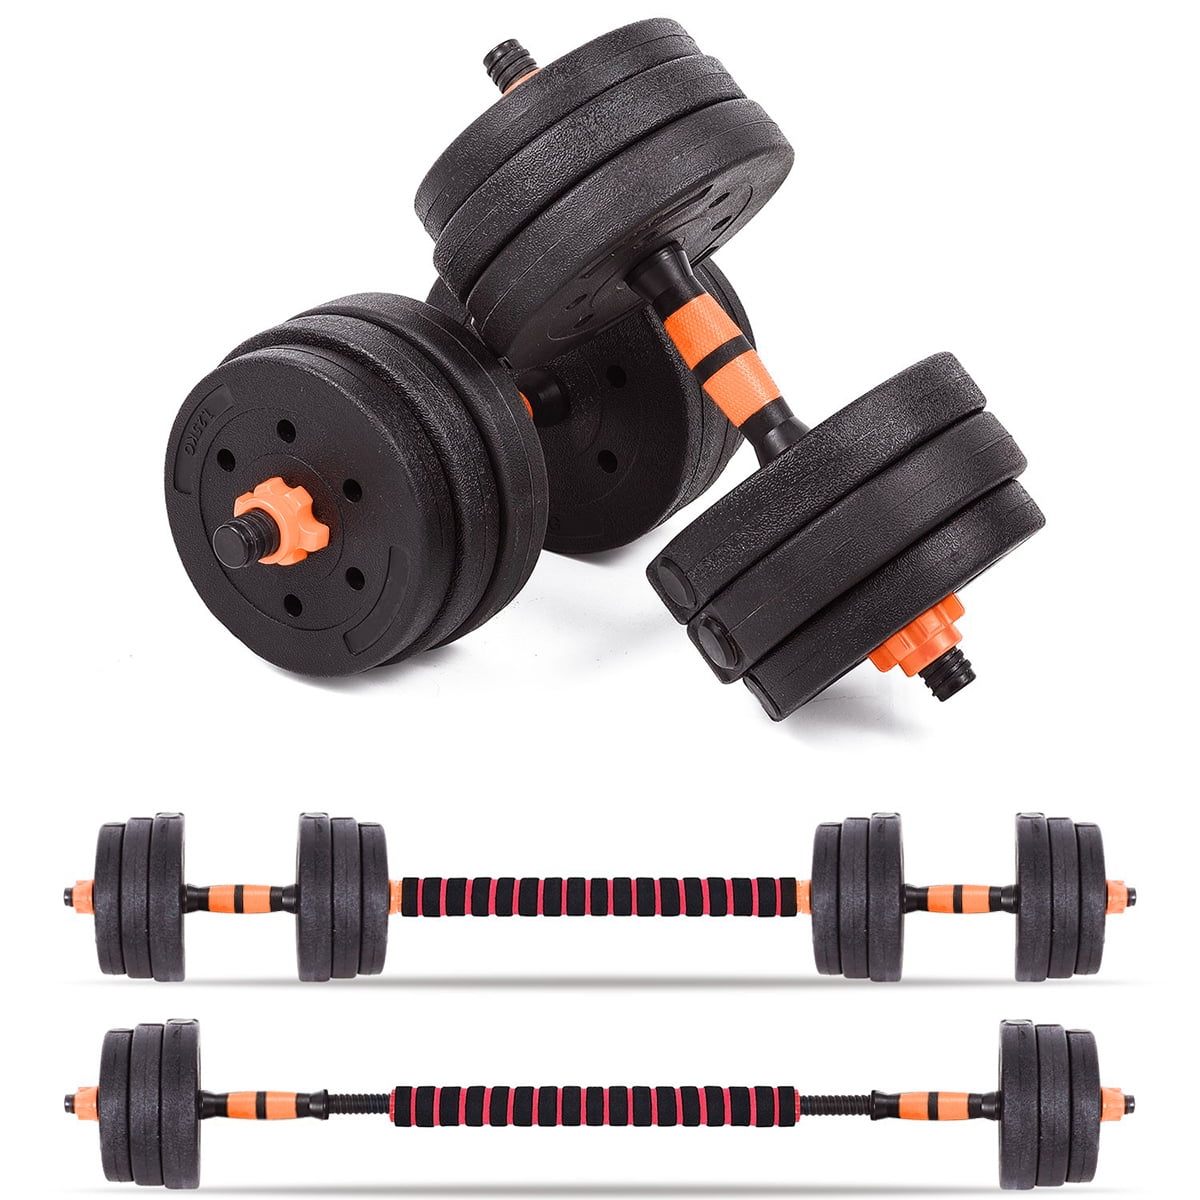 Totall 88 LB Weight Dumbbell Set Adjustable Cap Gym Barbell Plates Body Workout 